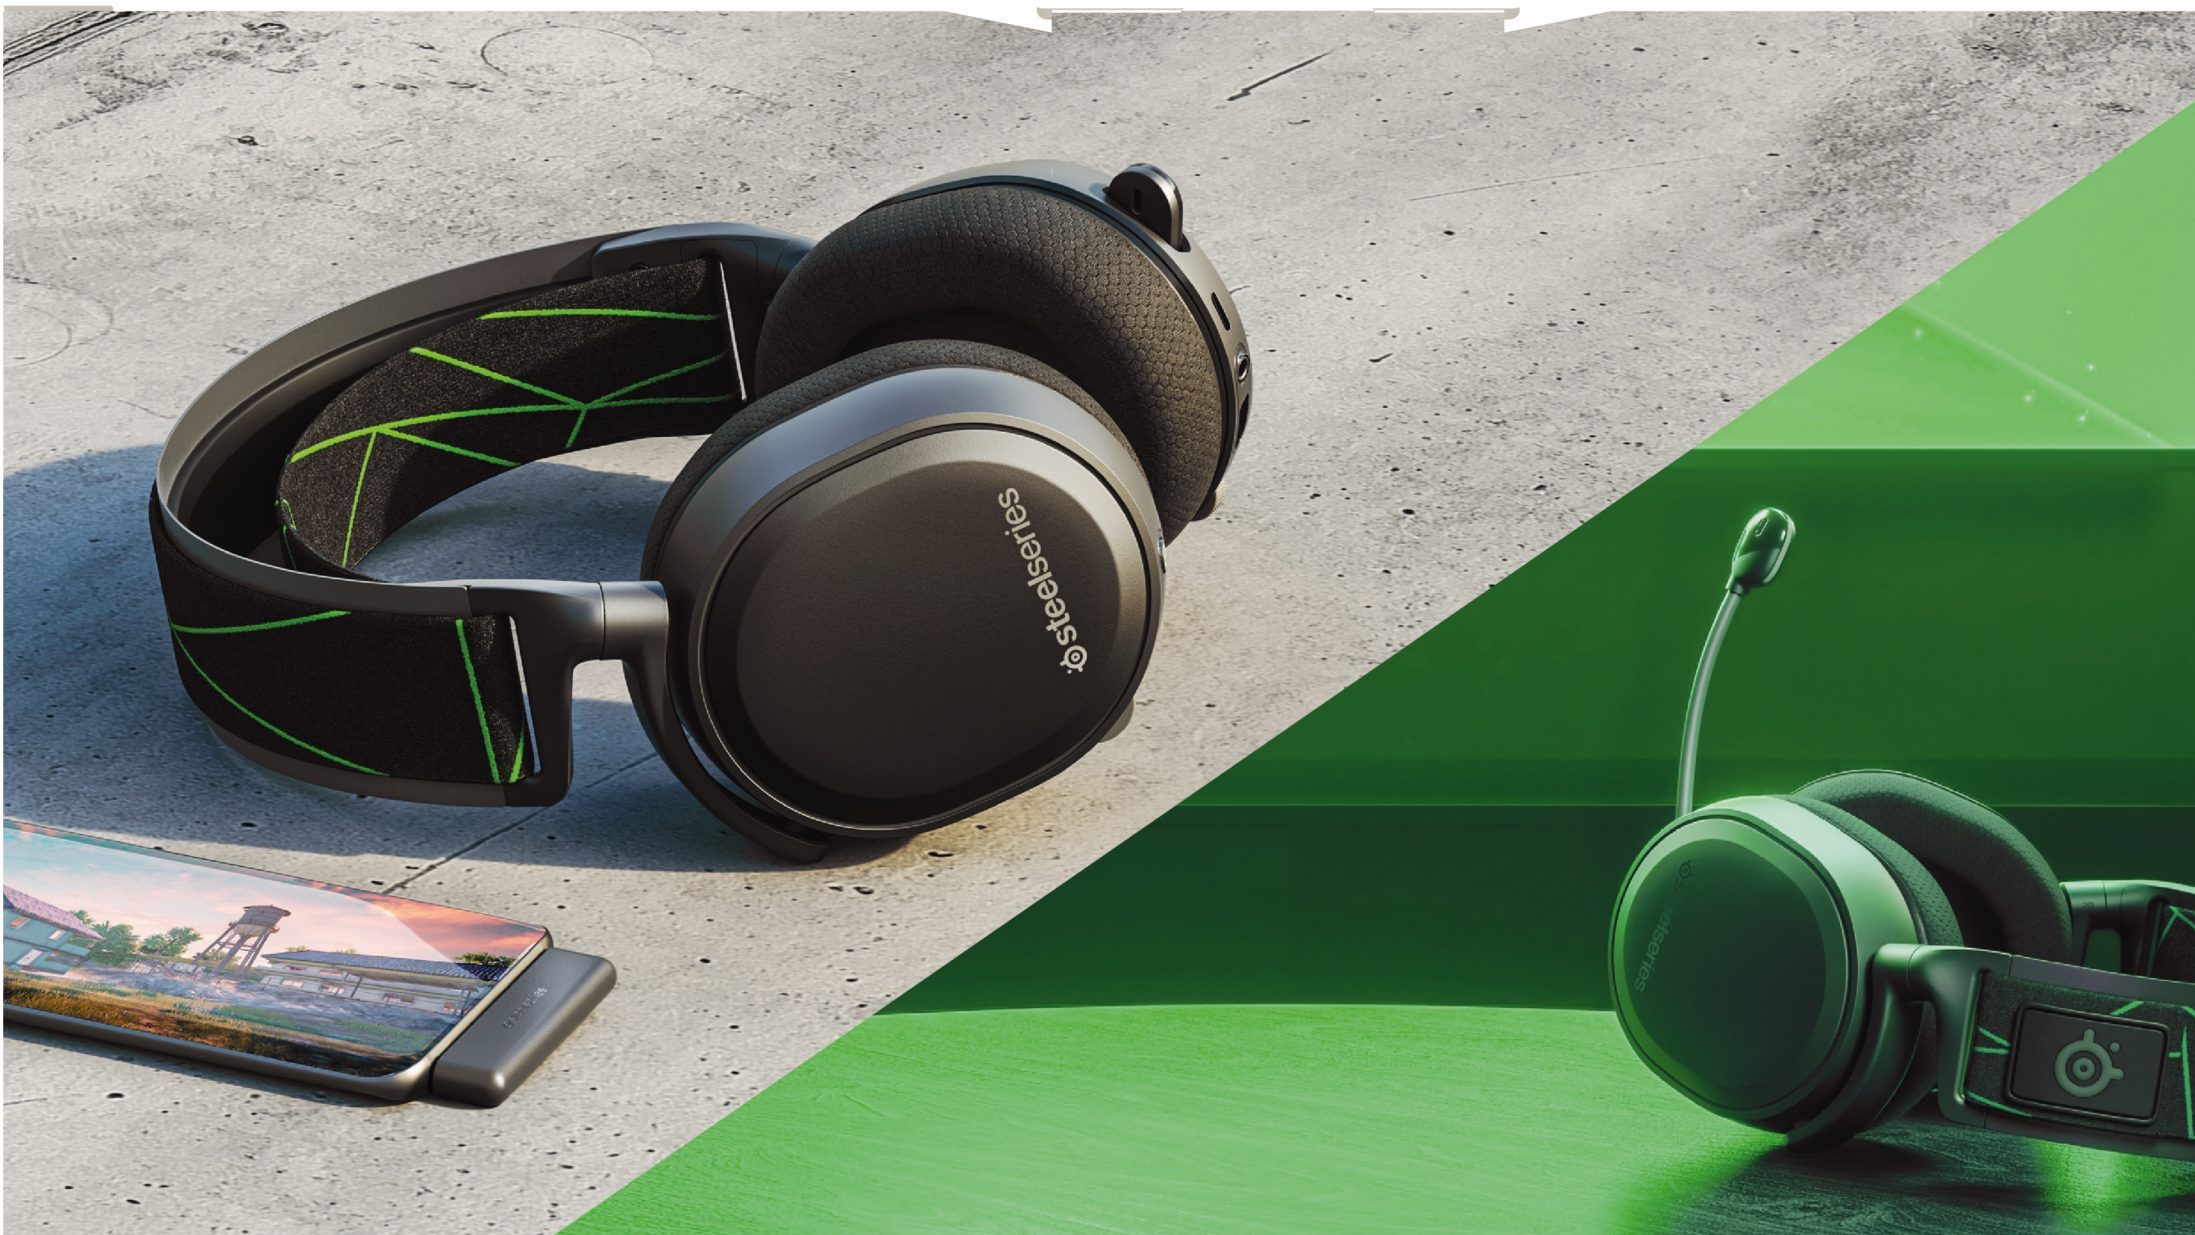 The SteelSeries Arctis 7X gaming headset on concrete and split into a separate image with green lighting.